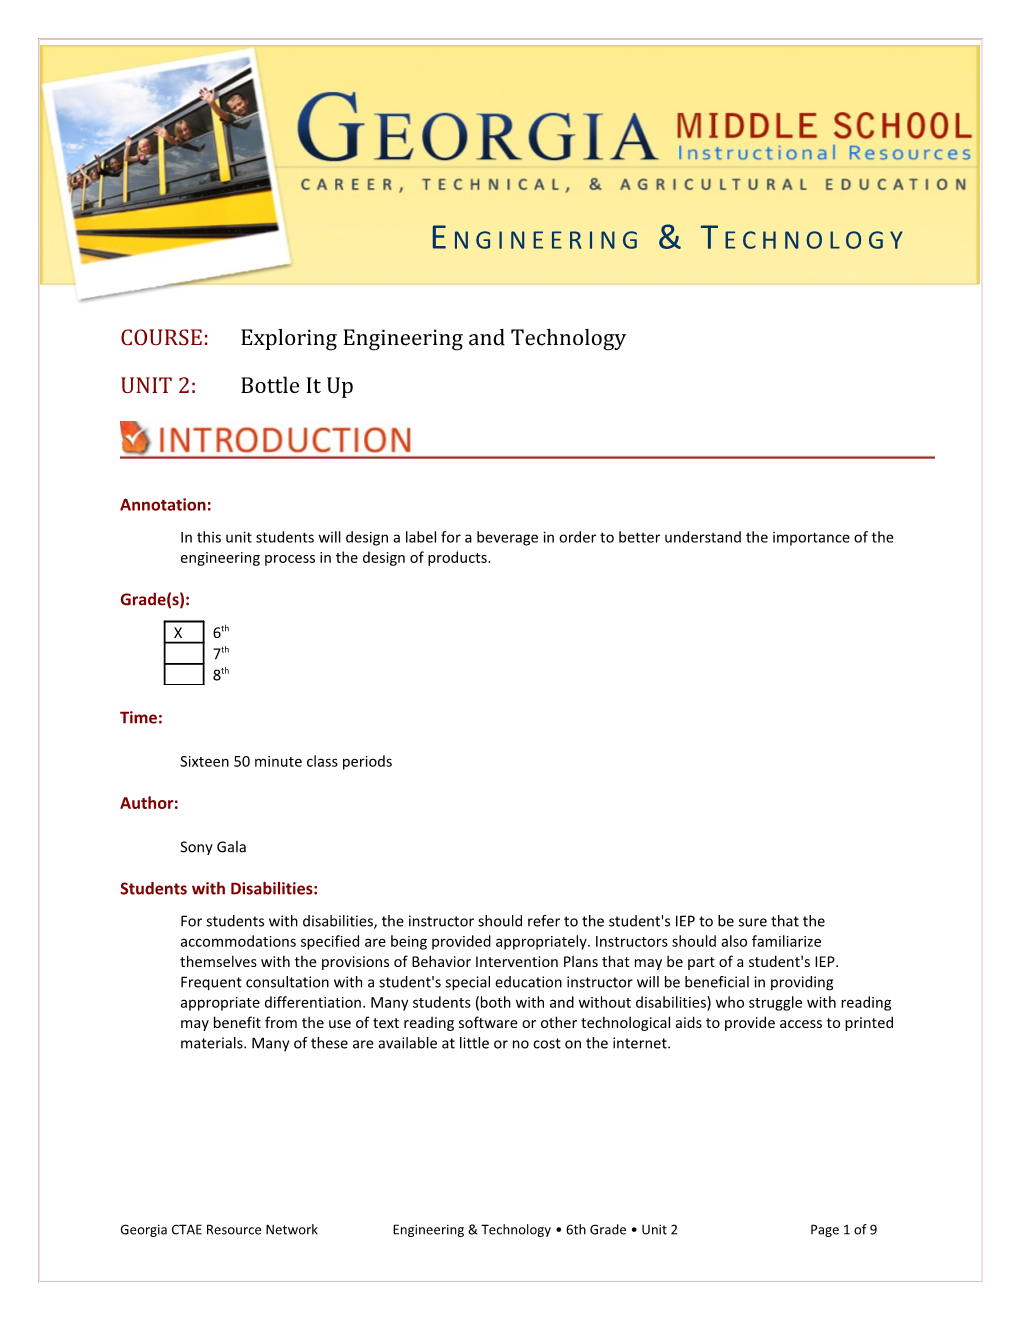 COURSE: Exploring Engineering and Technology